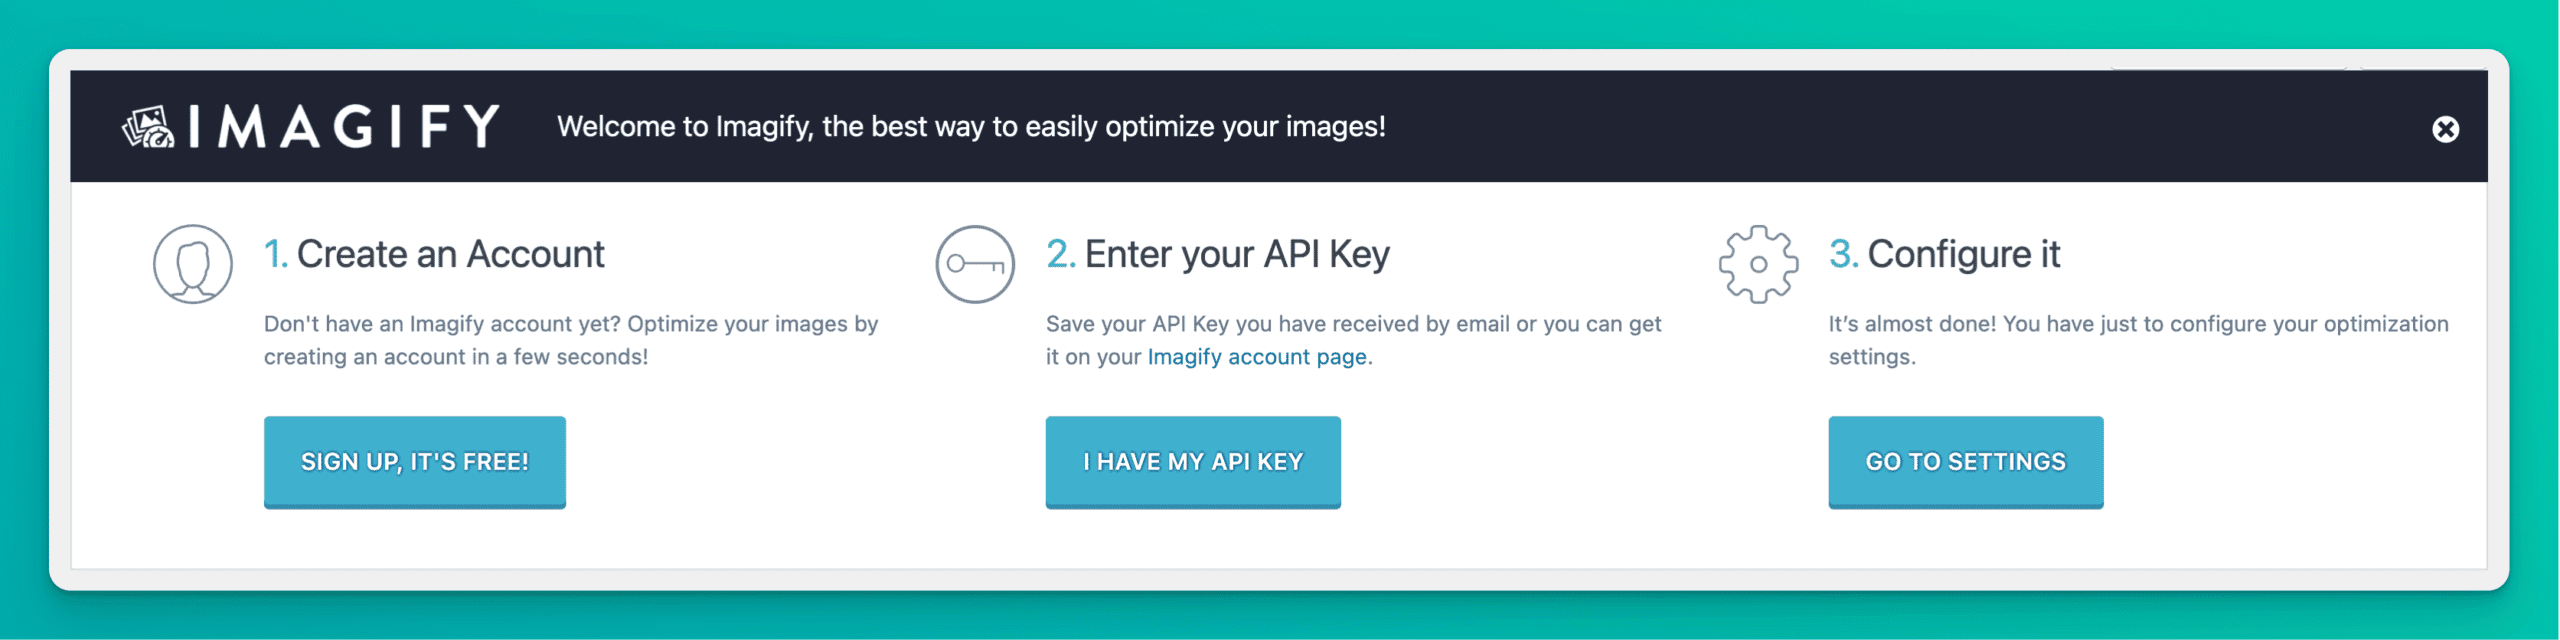 Imagify steps to launching – create an account, enter API key, and configure settings.